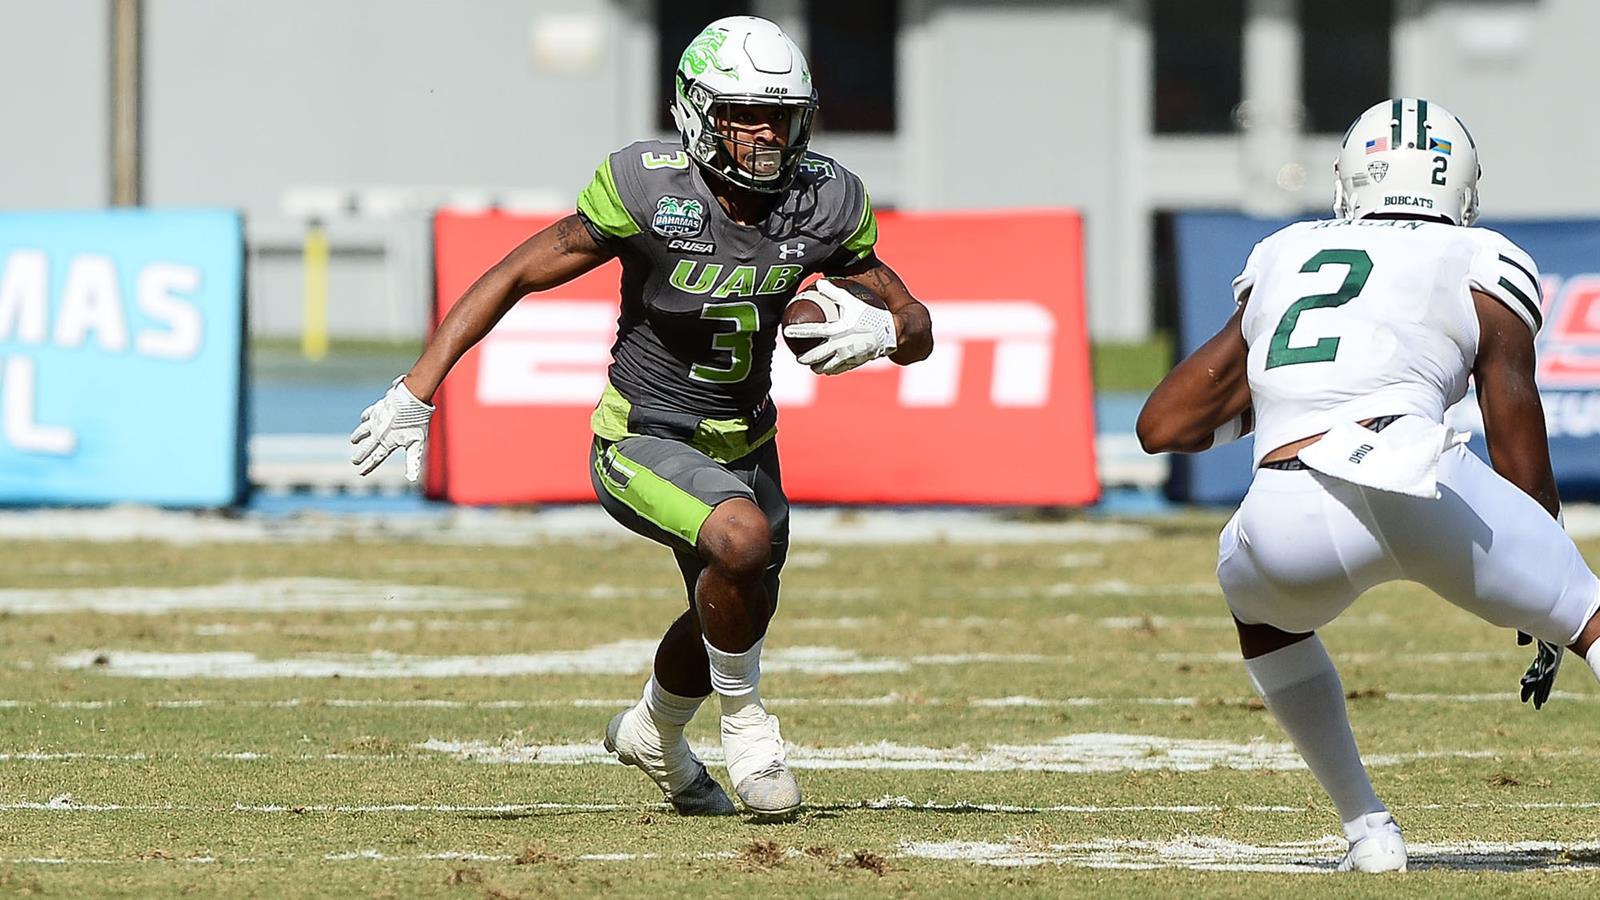 Ohio routs UAB in Bahamas Bowl